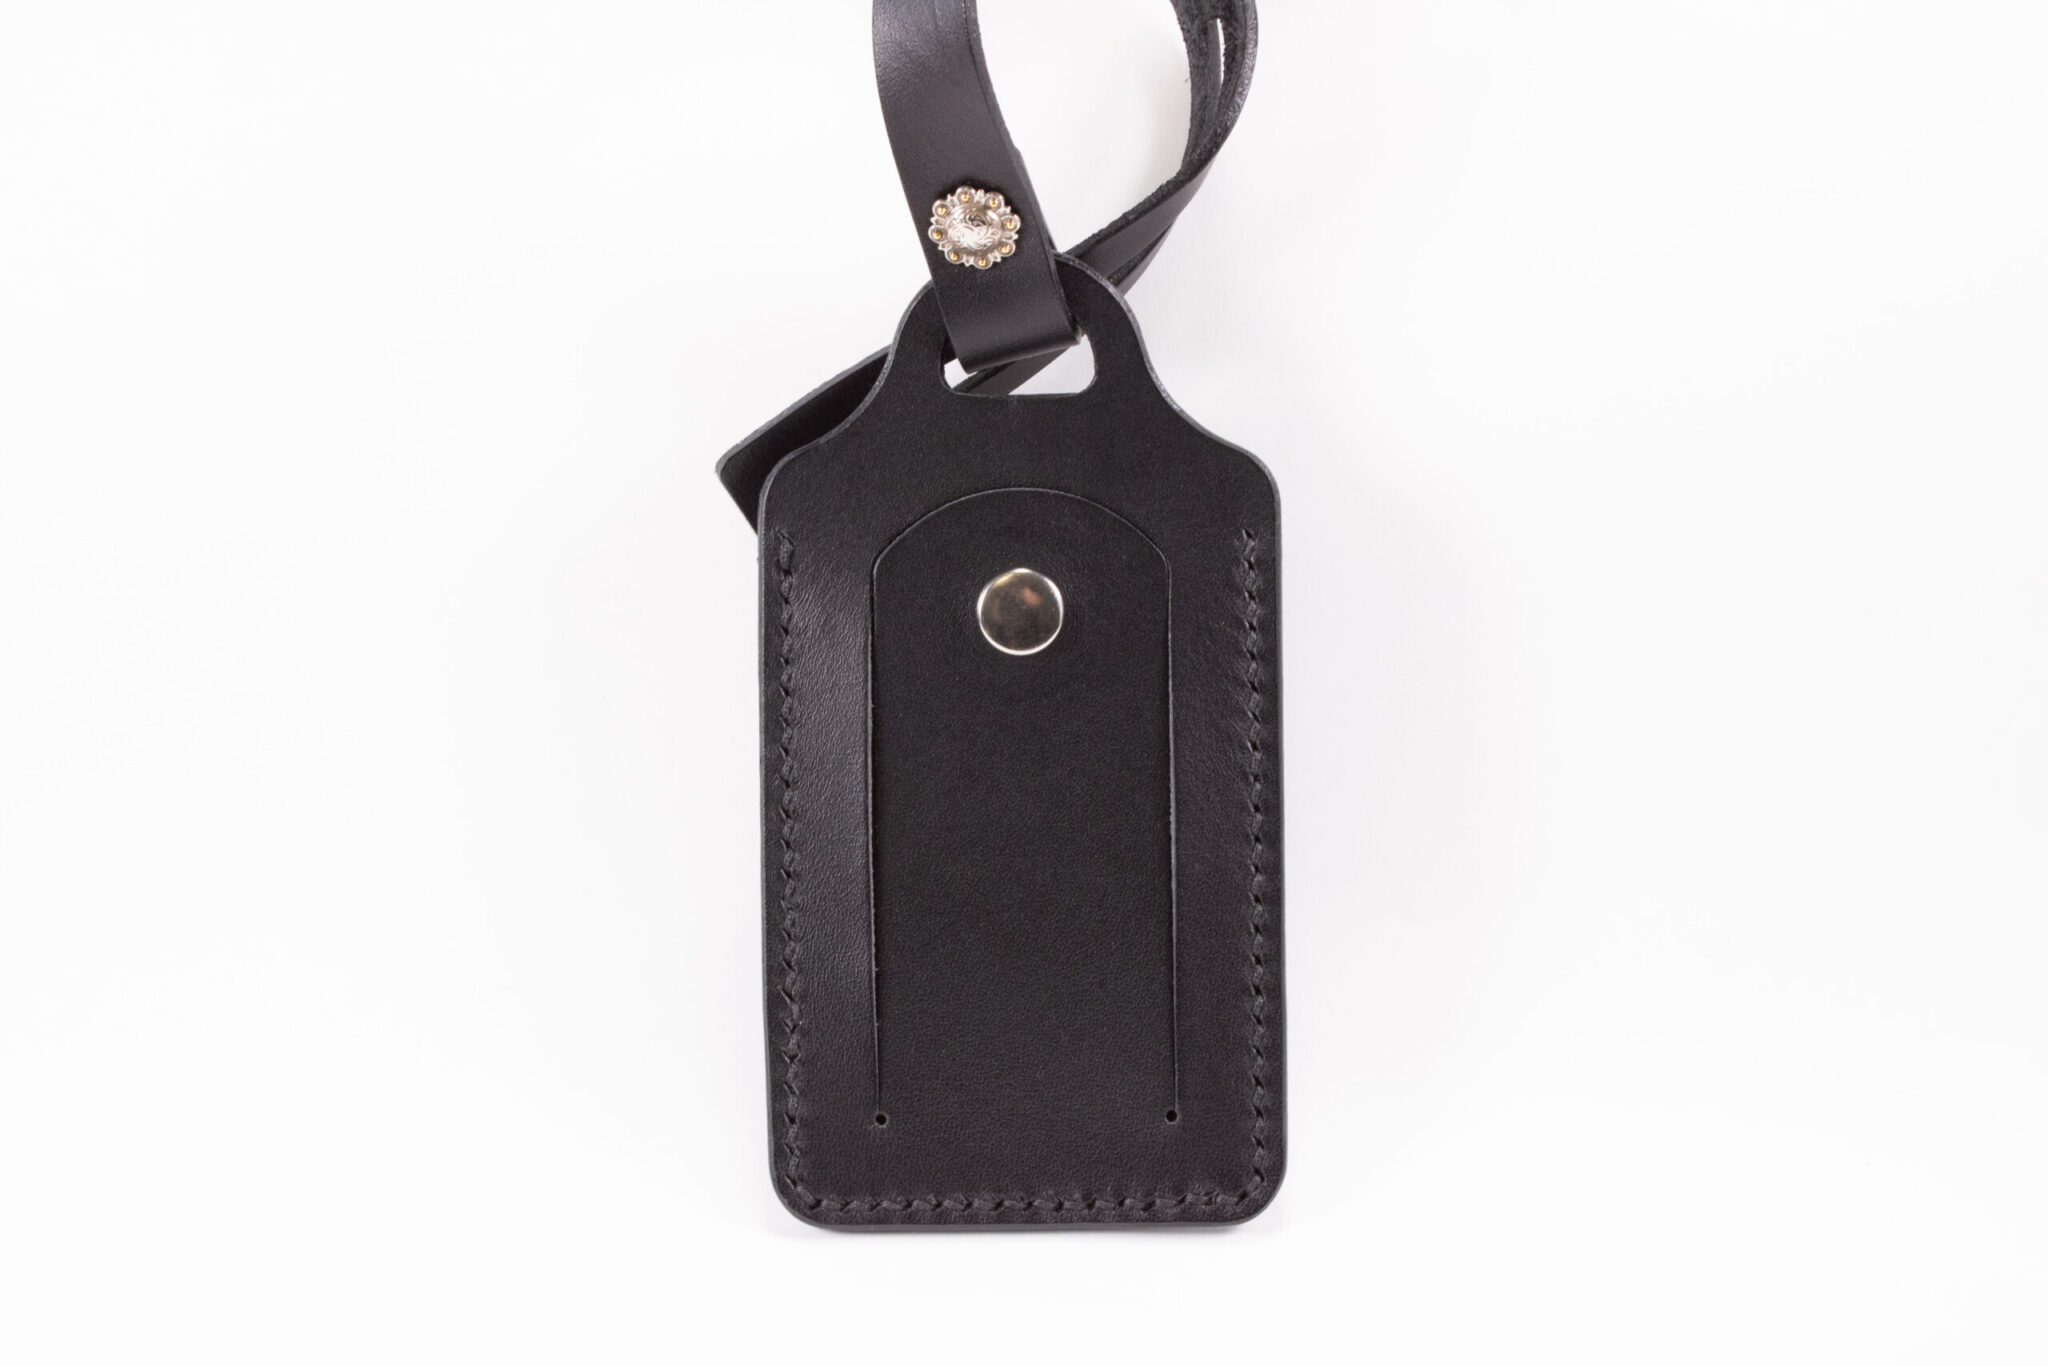 Product image of FredFloris personalized luggage tag